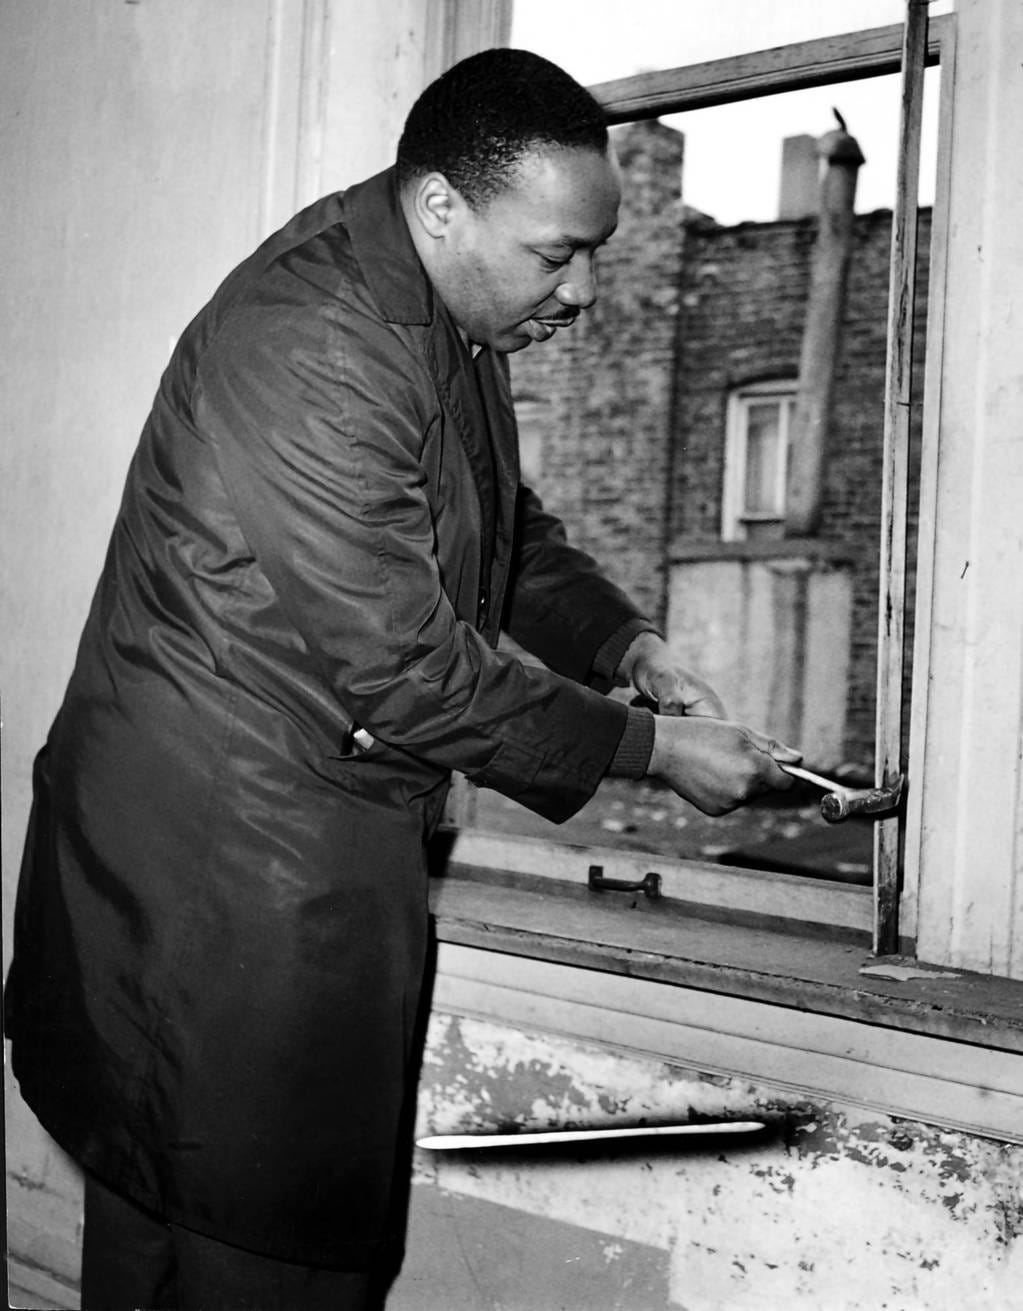 Martin Luther King Jr. helps remove a window frame while renovating an apartment at 1321 S. Loman Ave. in Chicago in 1966. King moved into a West Side apartment at 1550 S. Hamlin Ave. to highlight housing segregation issues in Chicago.